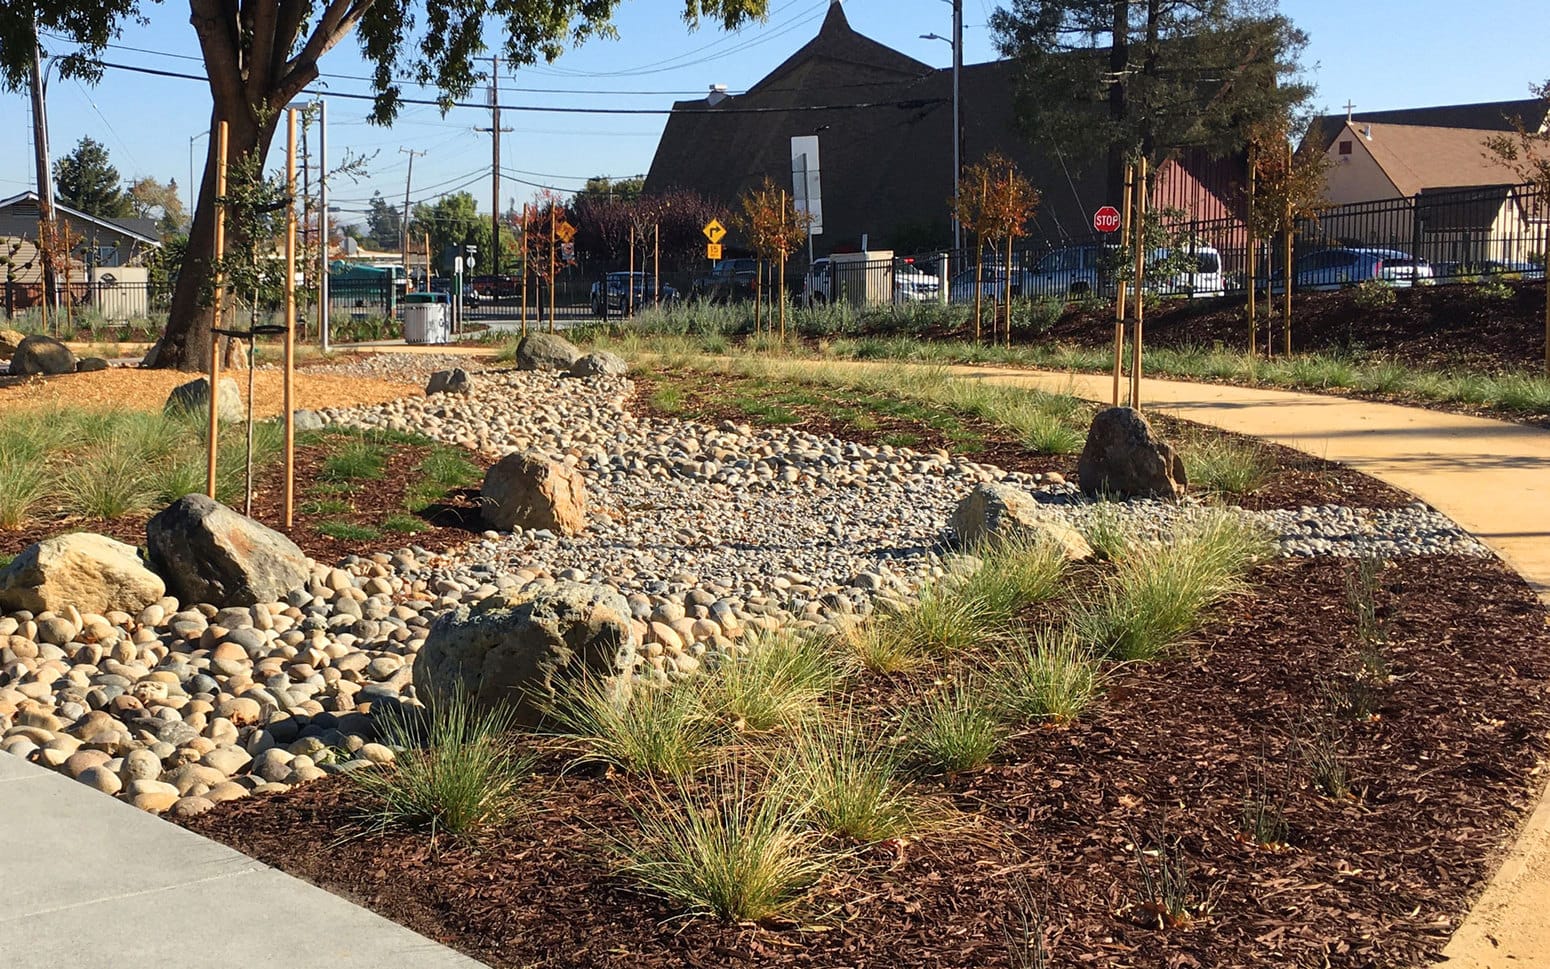 The bioswale with rocks, gravel and plantings